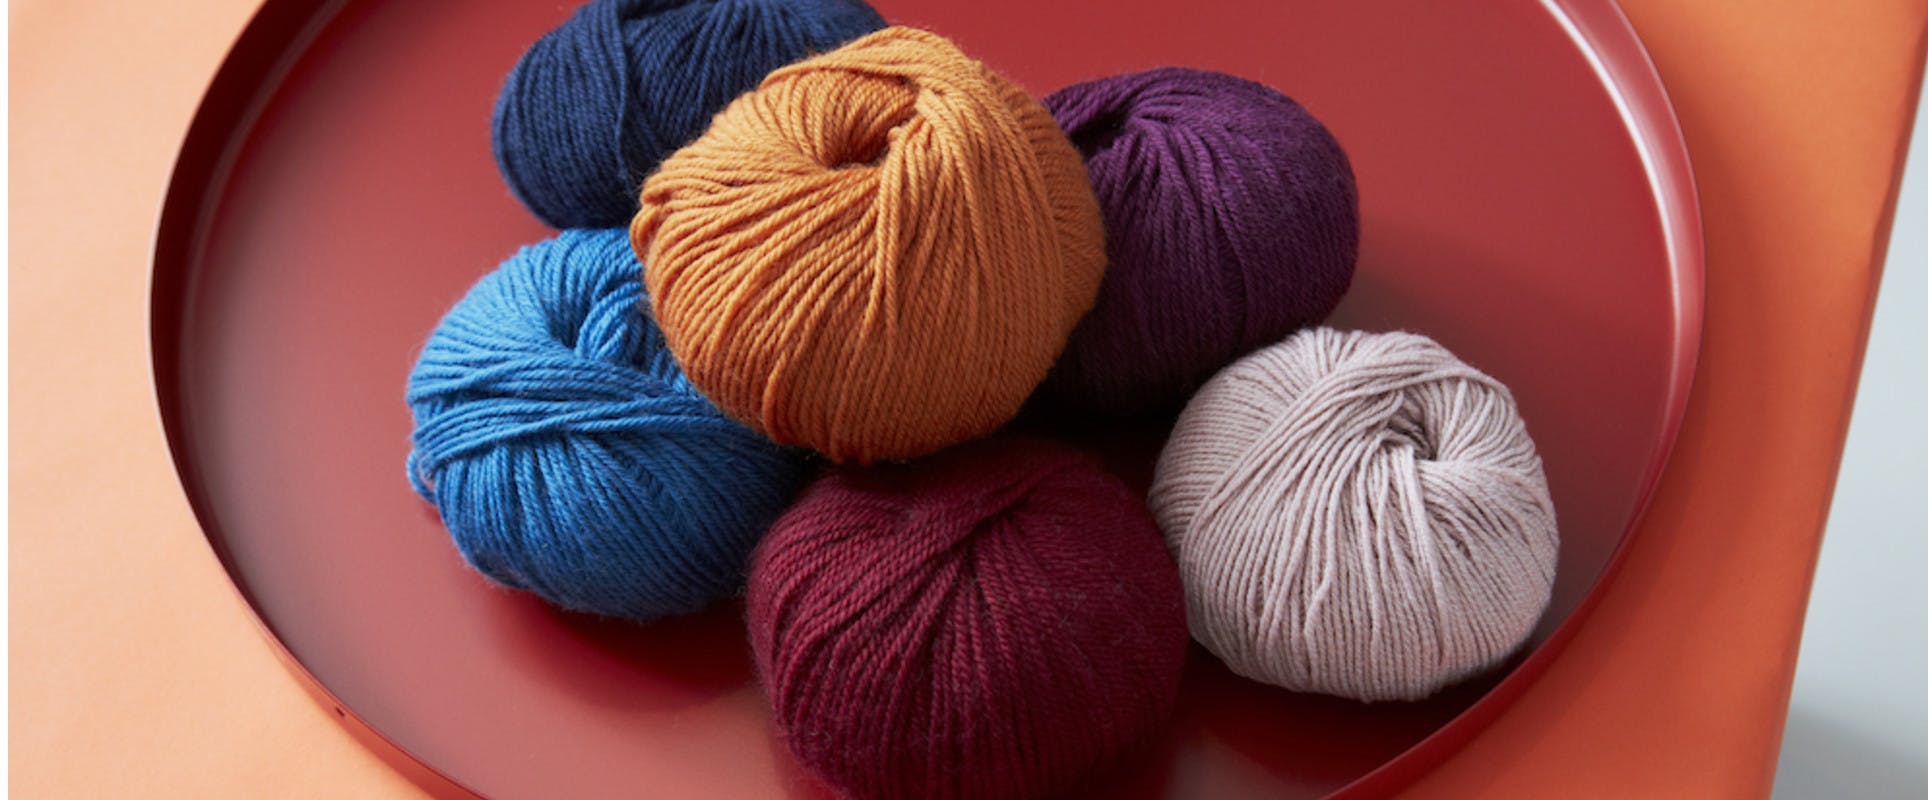 Types of Yarn Explained, Buying Guide